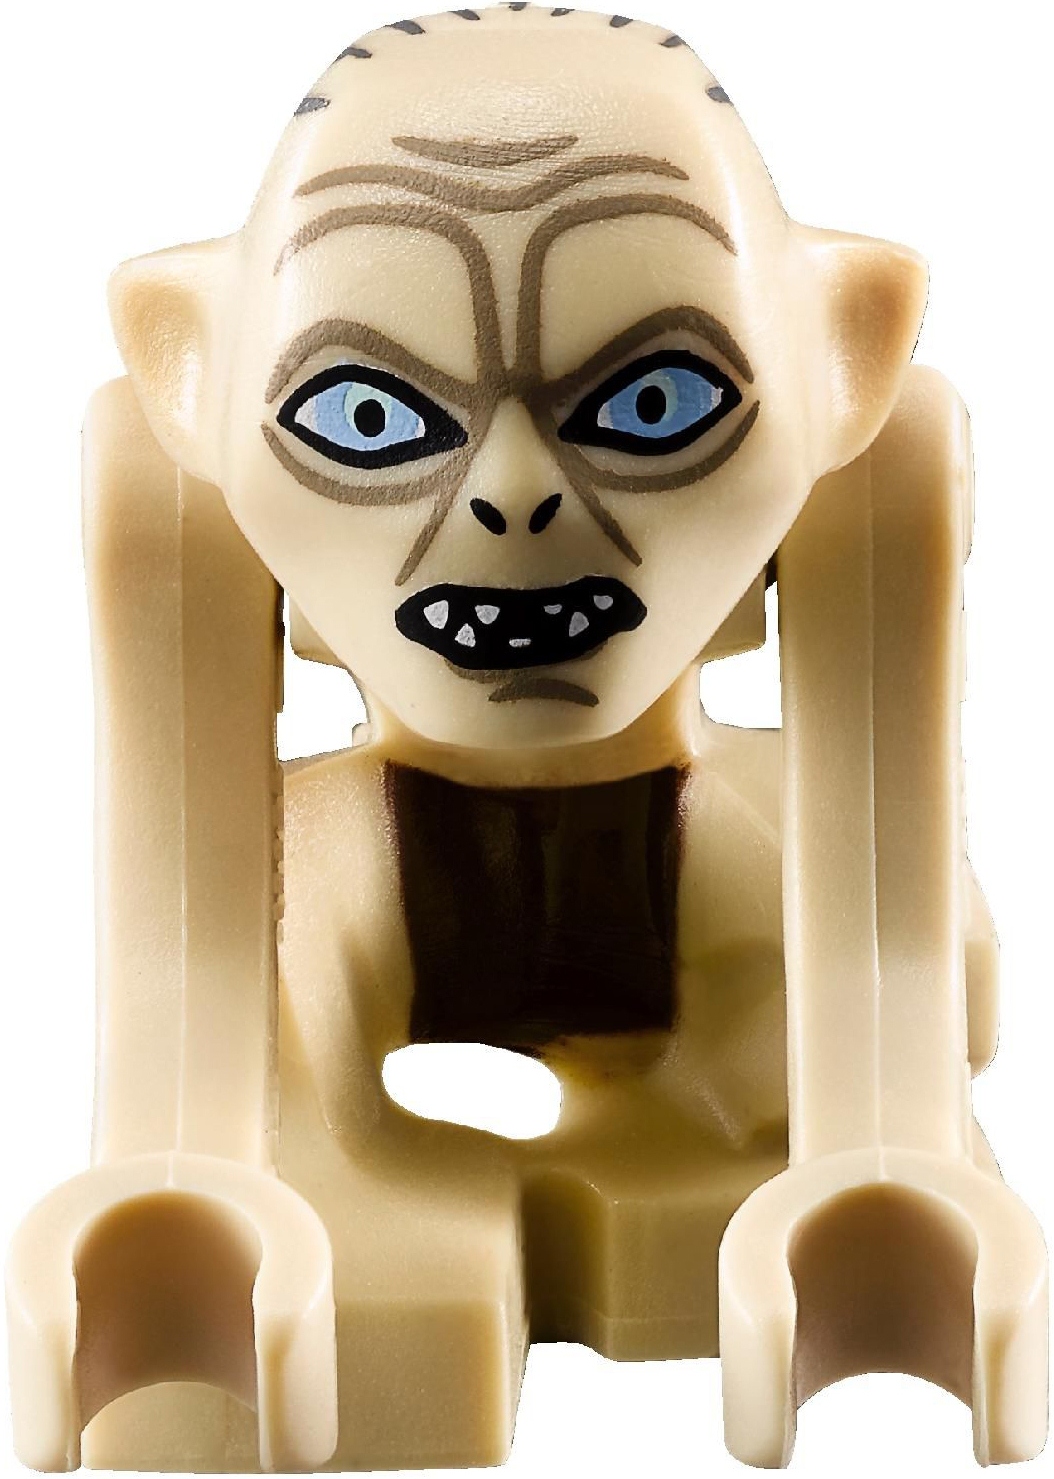 lord of the rings lego taming gollum